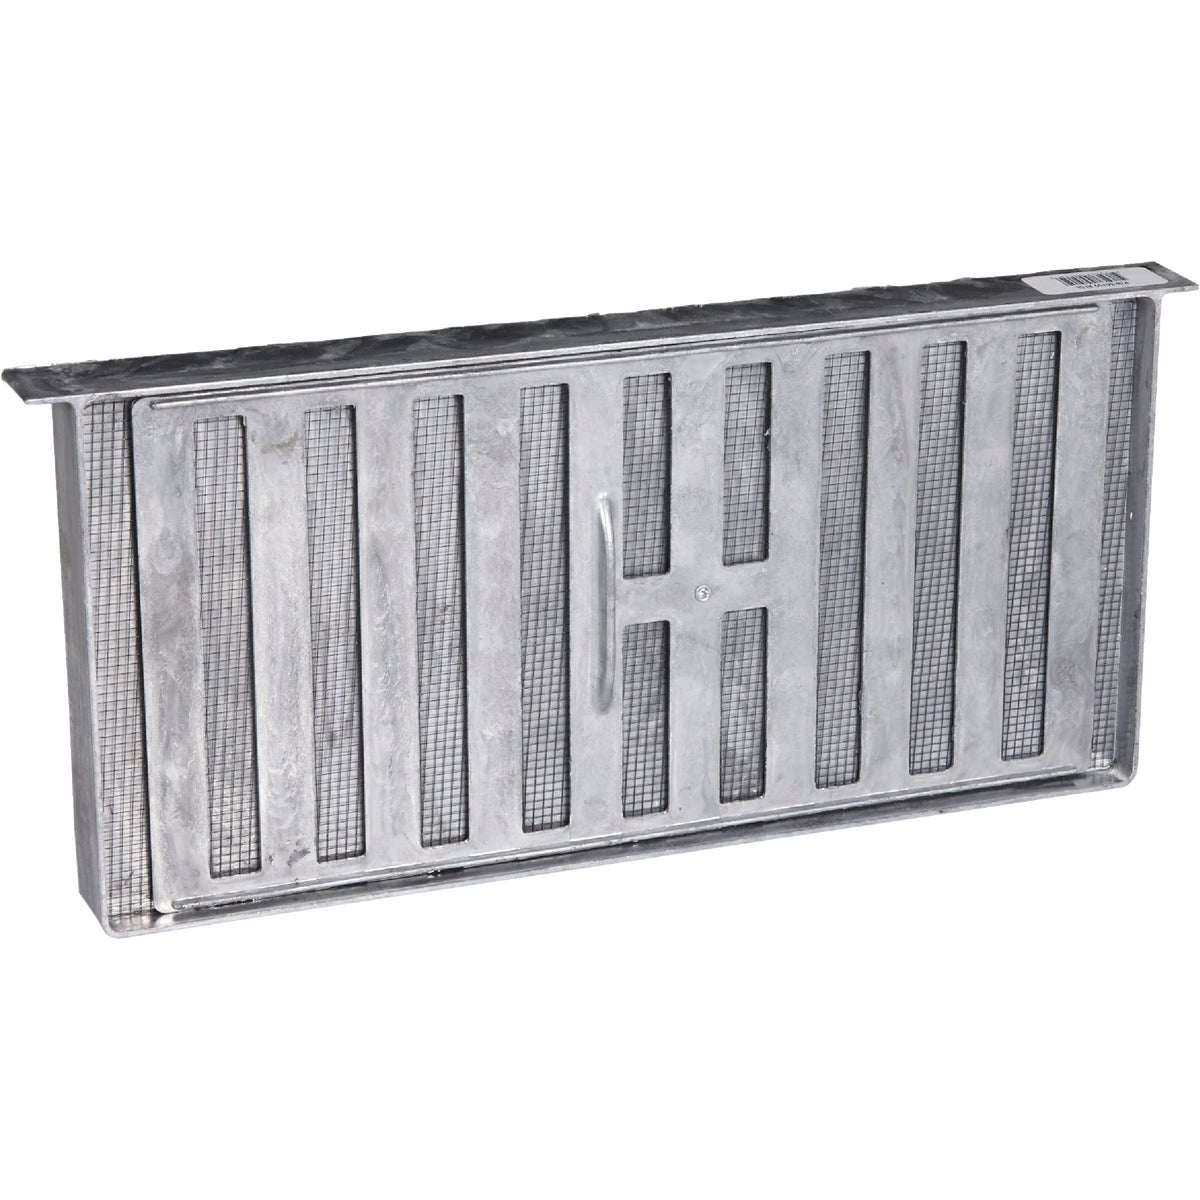 Item 105058, Manual foundation vent with sliding damper and lintel helps remove moisture